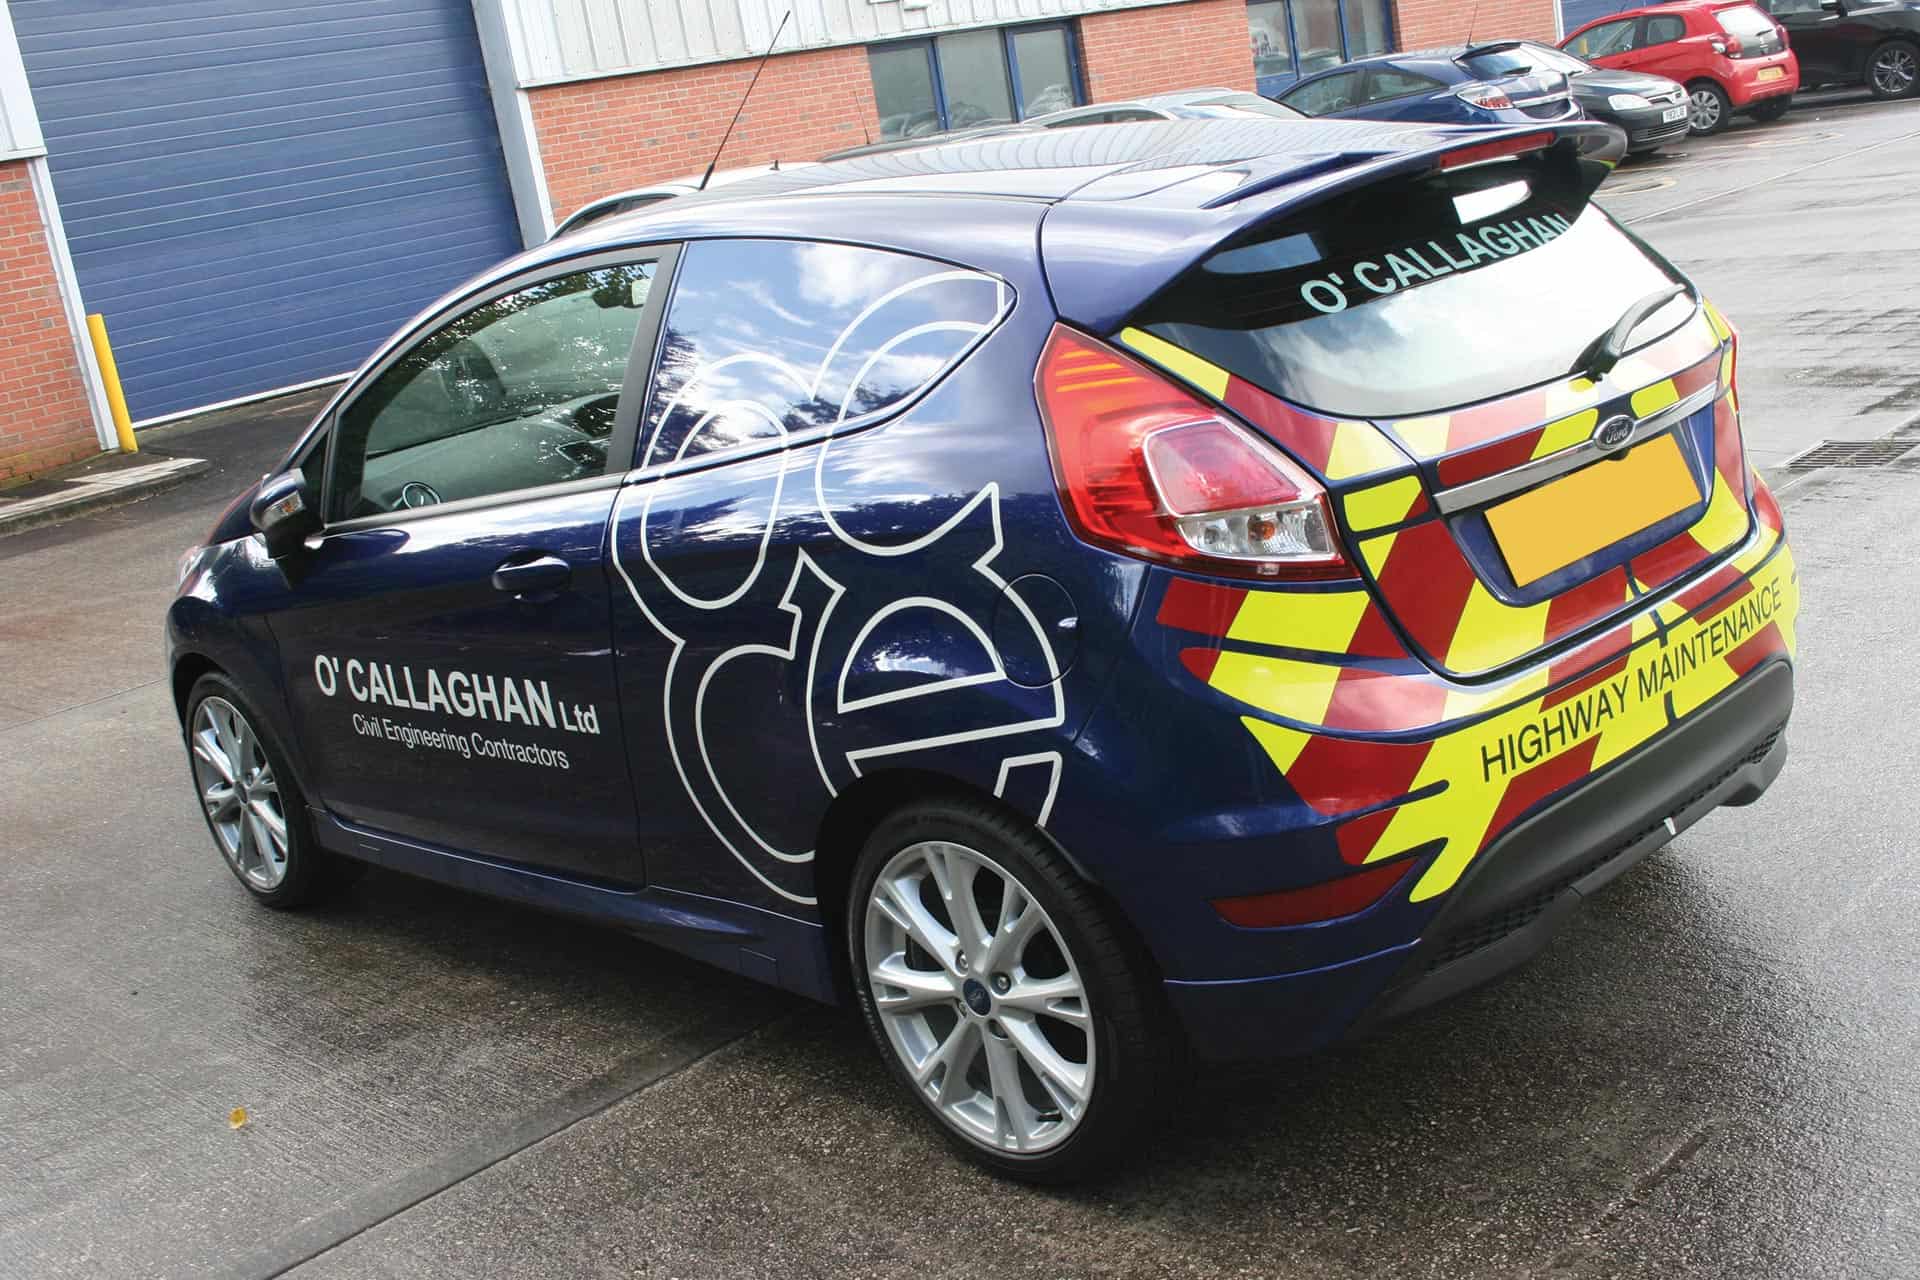 O'Callaghan Civil Engineering Contractors - vehicle graphics and reflective 8